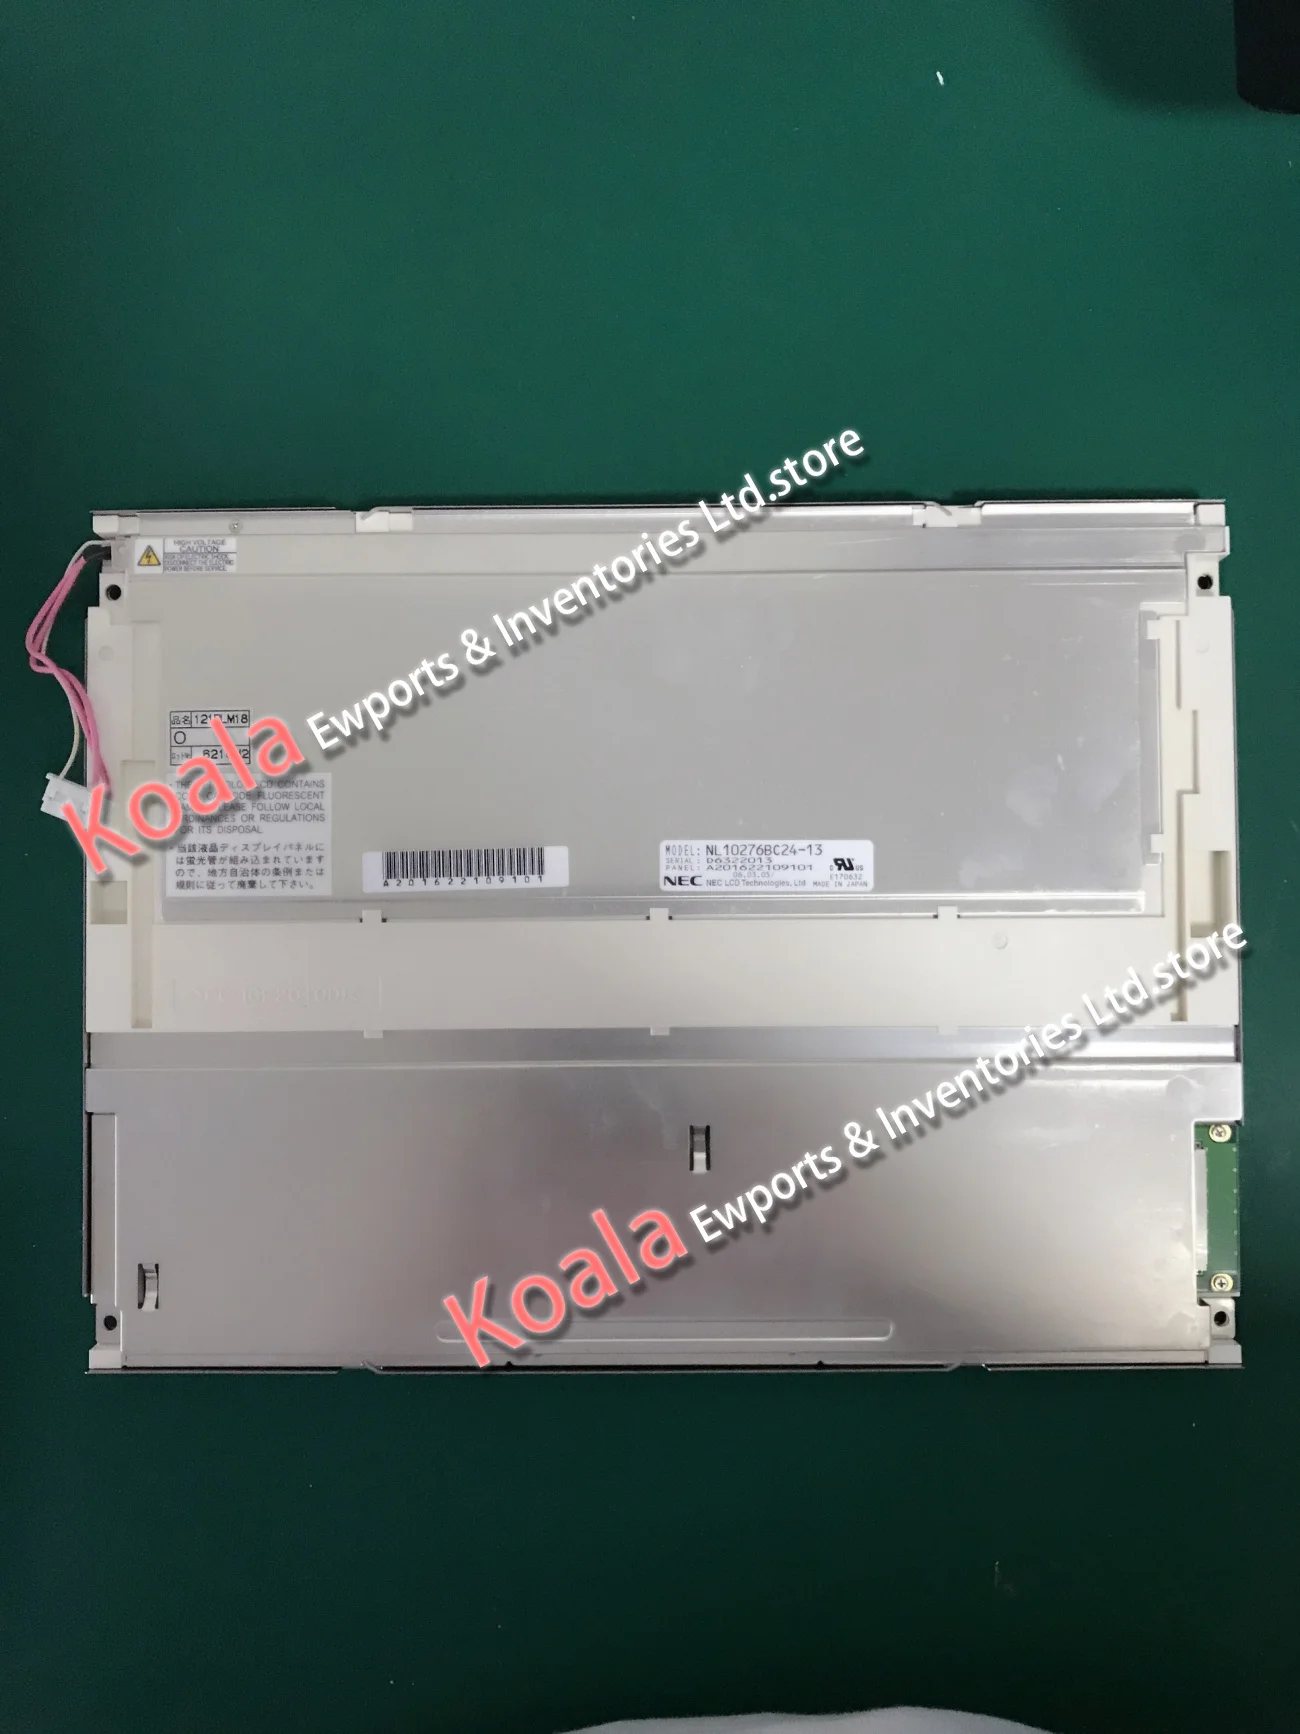 

NL10276BC24-13 12.1 INCH INDUSTRIAL MONITOR LCD DISPLAY SCREEN CCFL LVDS 20 PINS TFT ORIGHINAL 1024*768